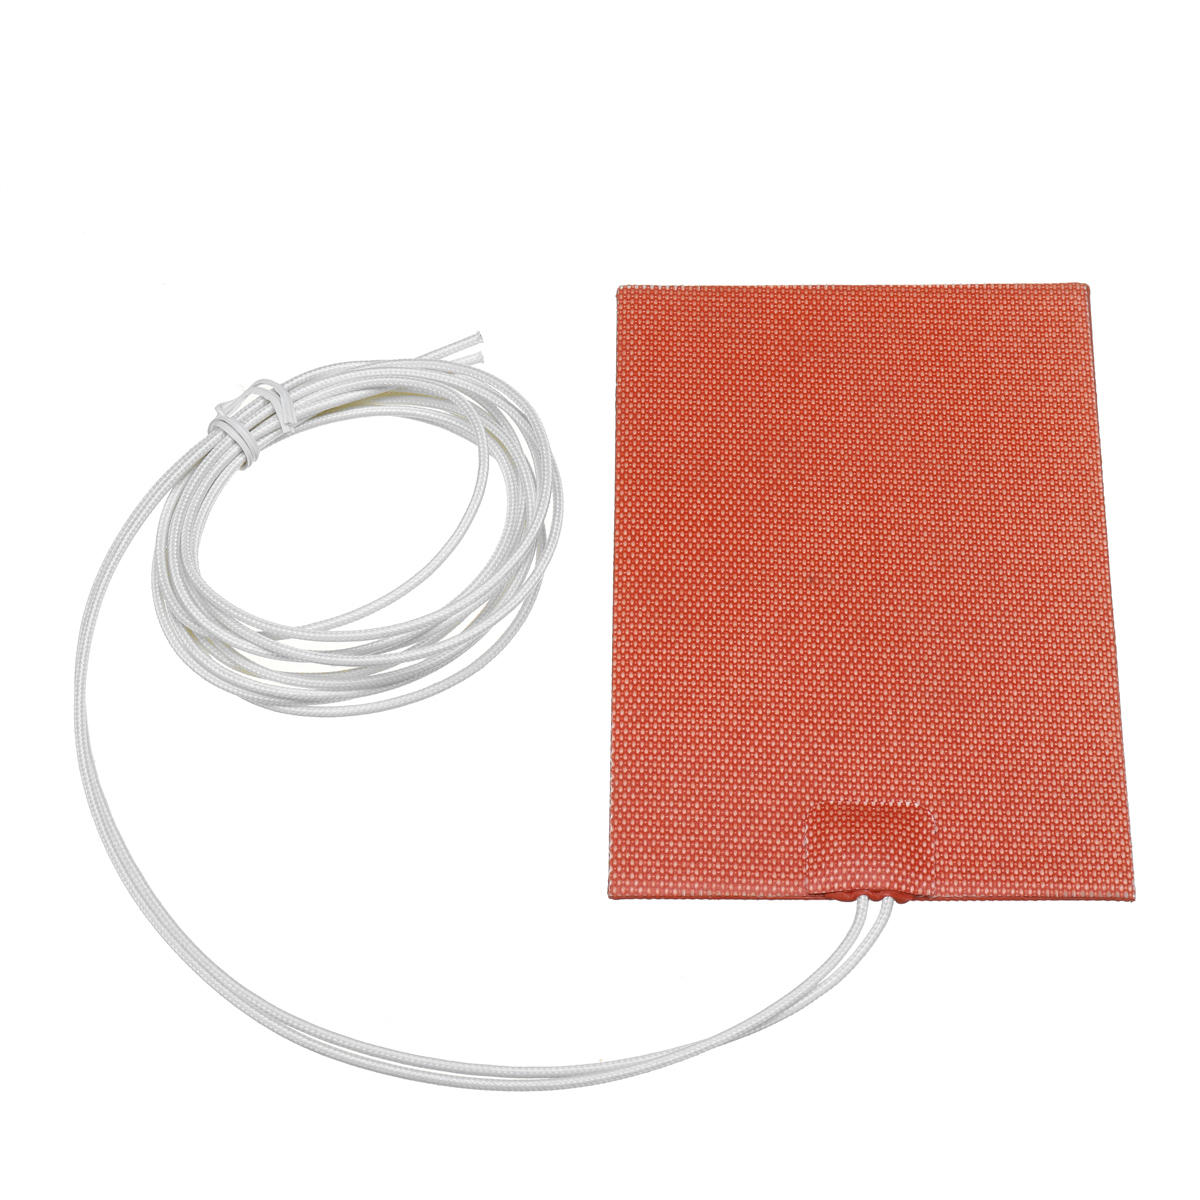 

300W 240V 10*15cm Silicone Heated Bed Heating Pad w/ Adhesive Backing for 3D Printer Hot Bed